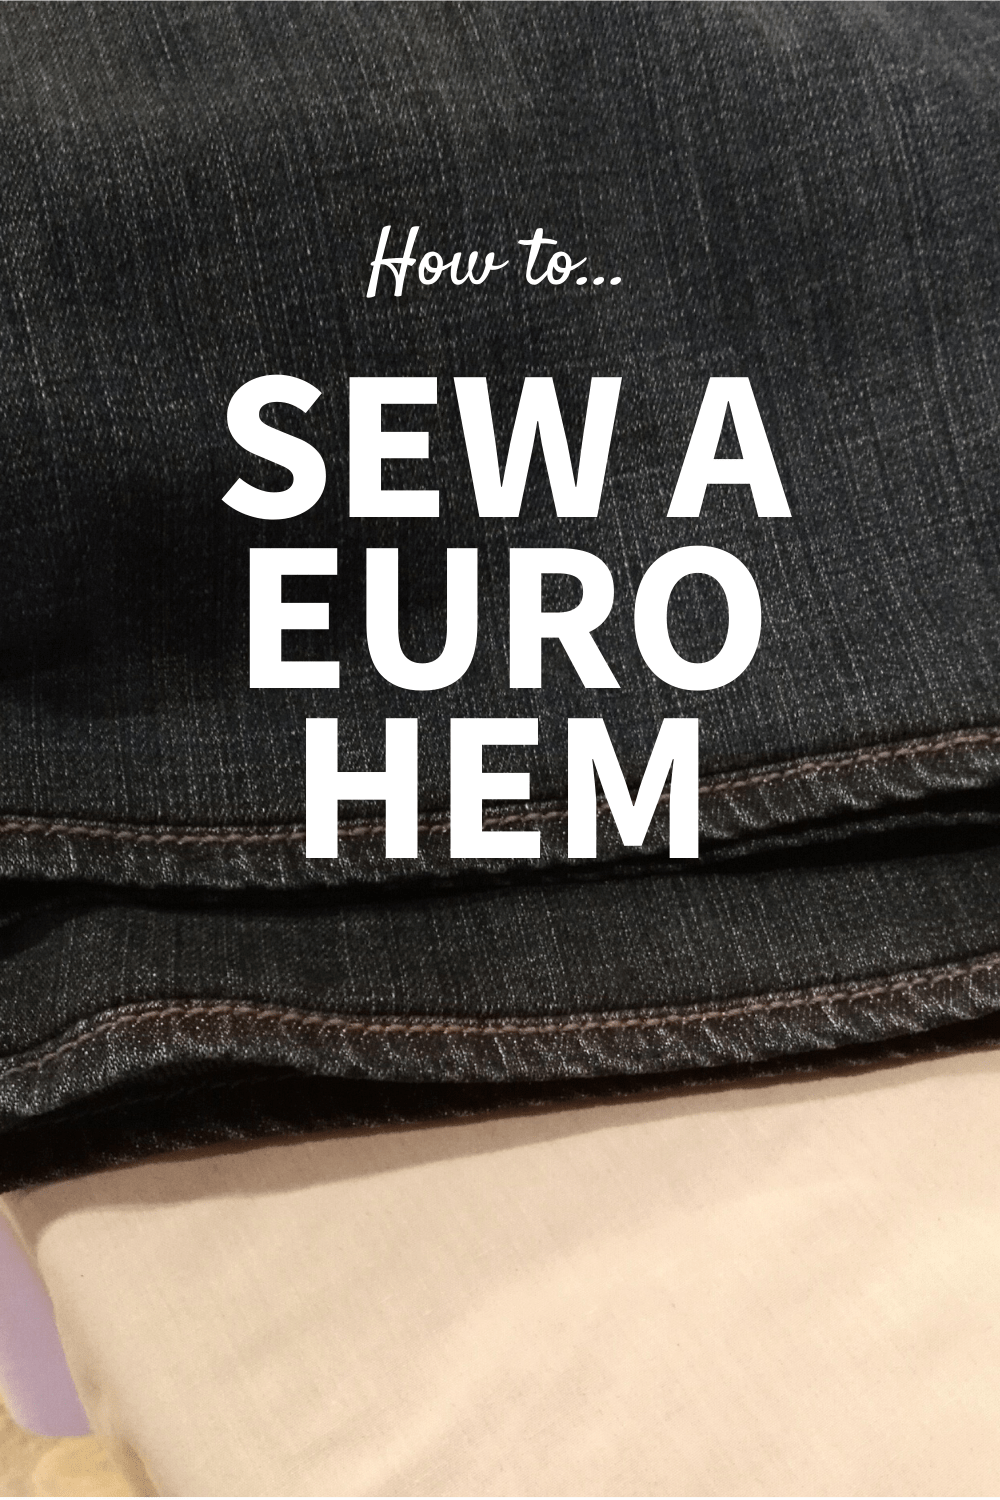 How to sew a Euro Hem on Jeans